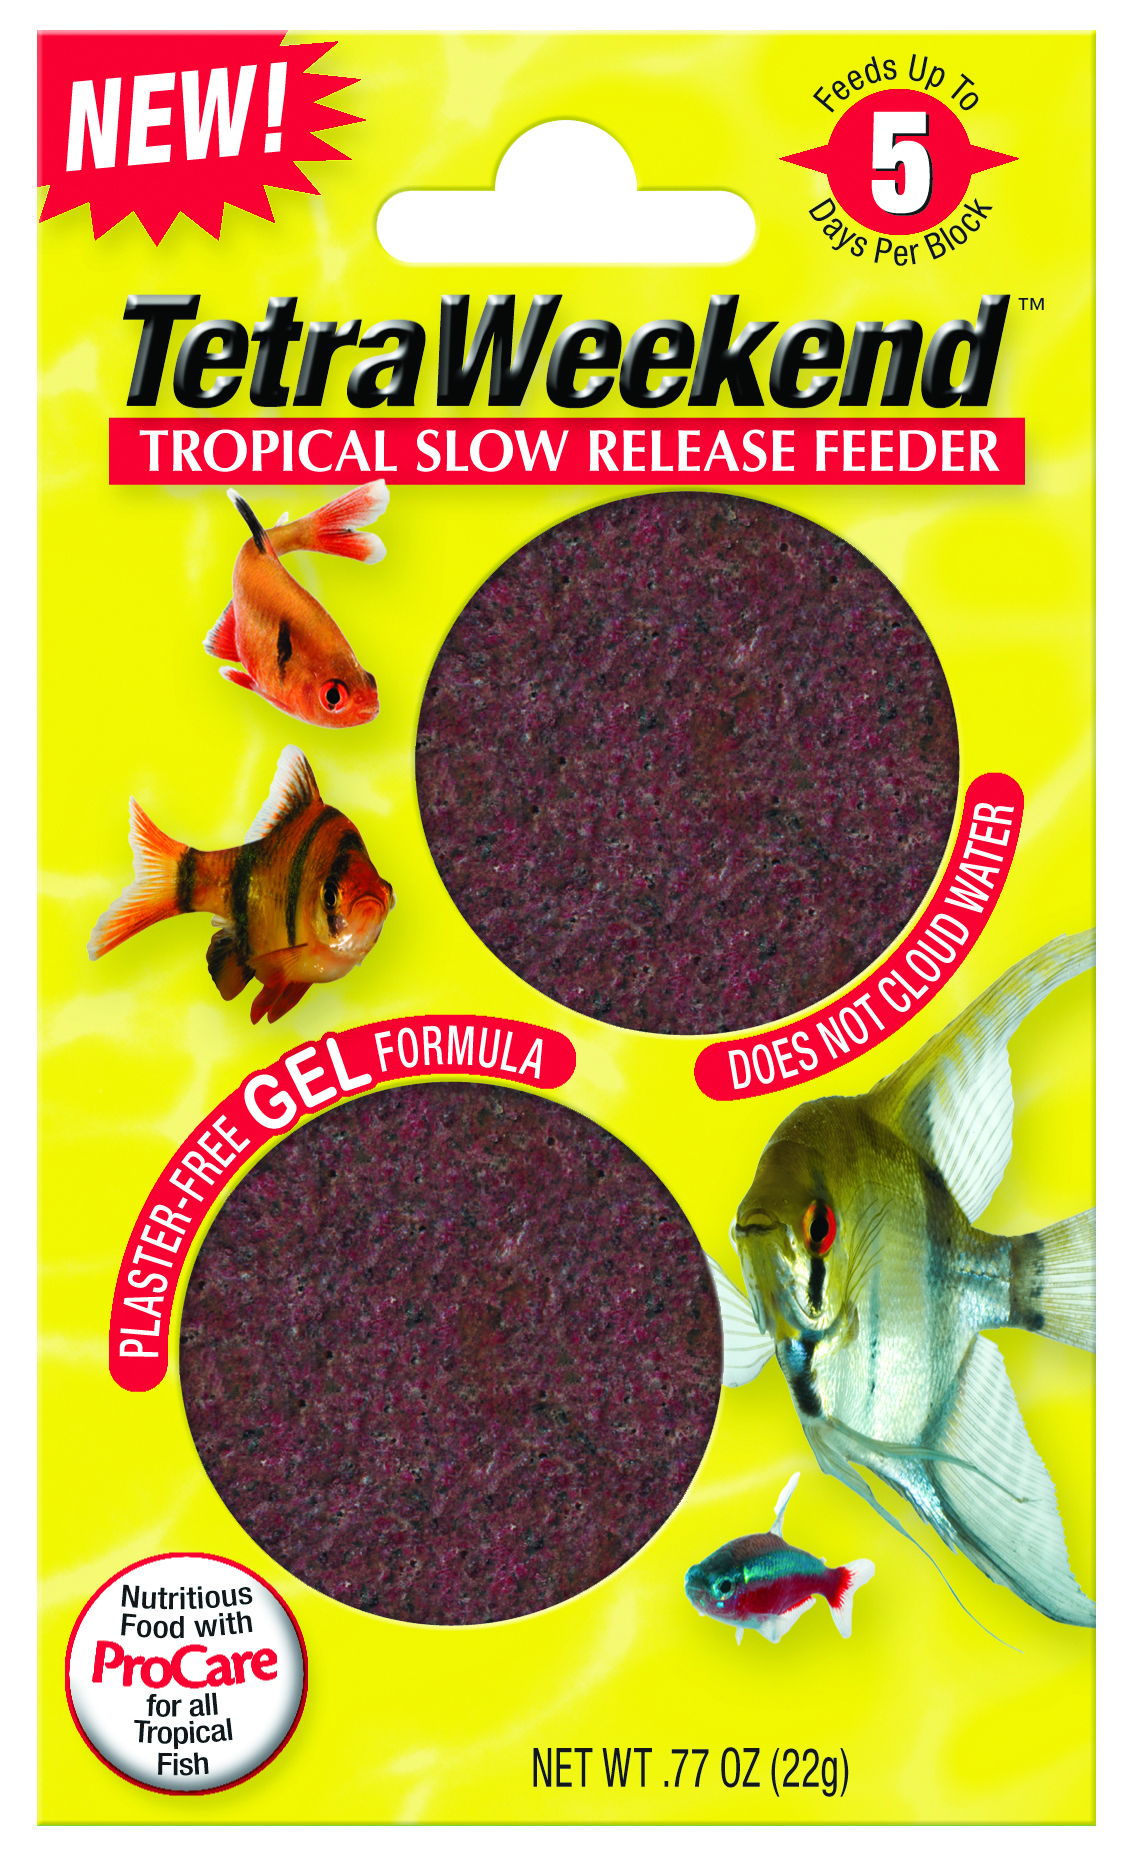 TETRAWEEKEND 5-DAY FEEDER FOR TROPICAL FISH